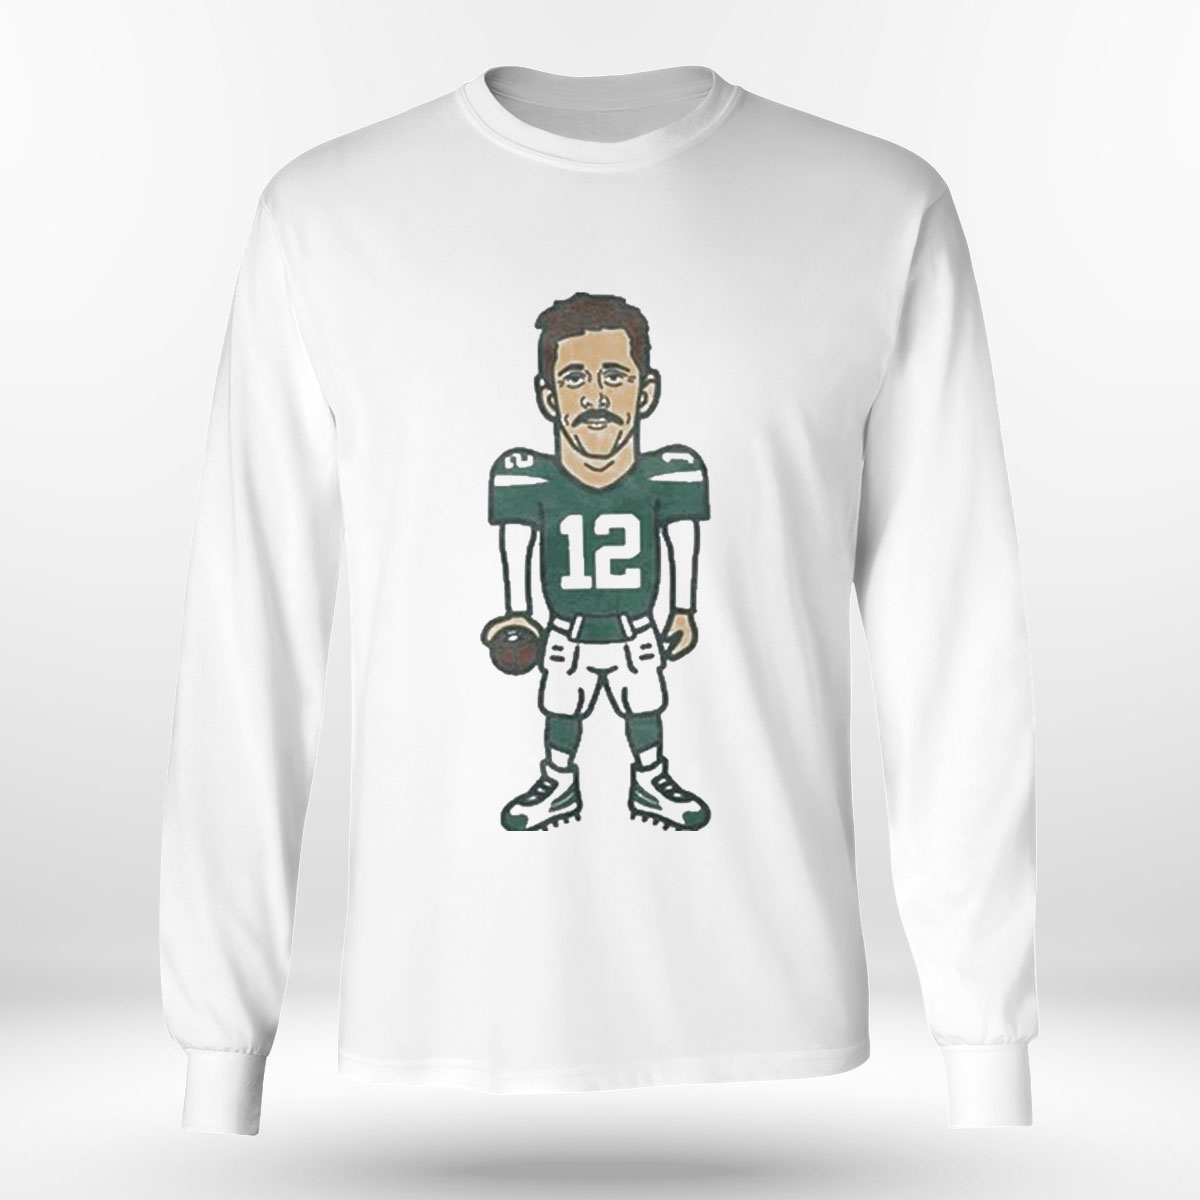 12 Aaron Rodgers Football Caricature T-shirt